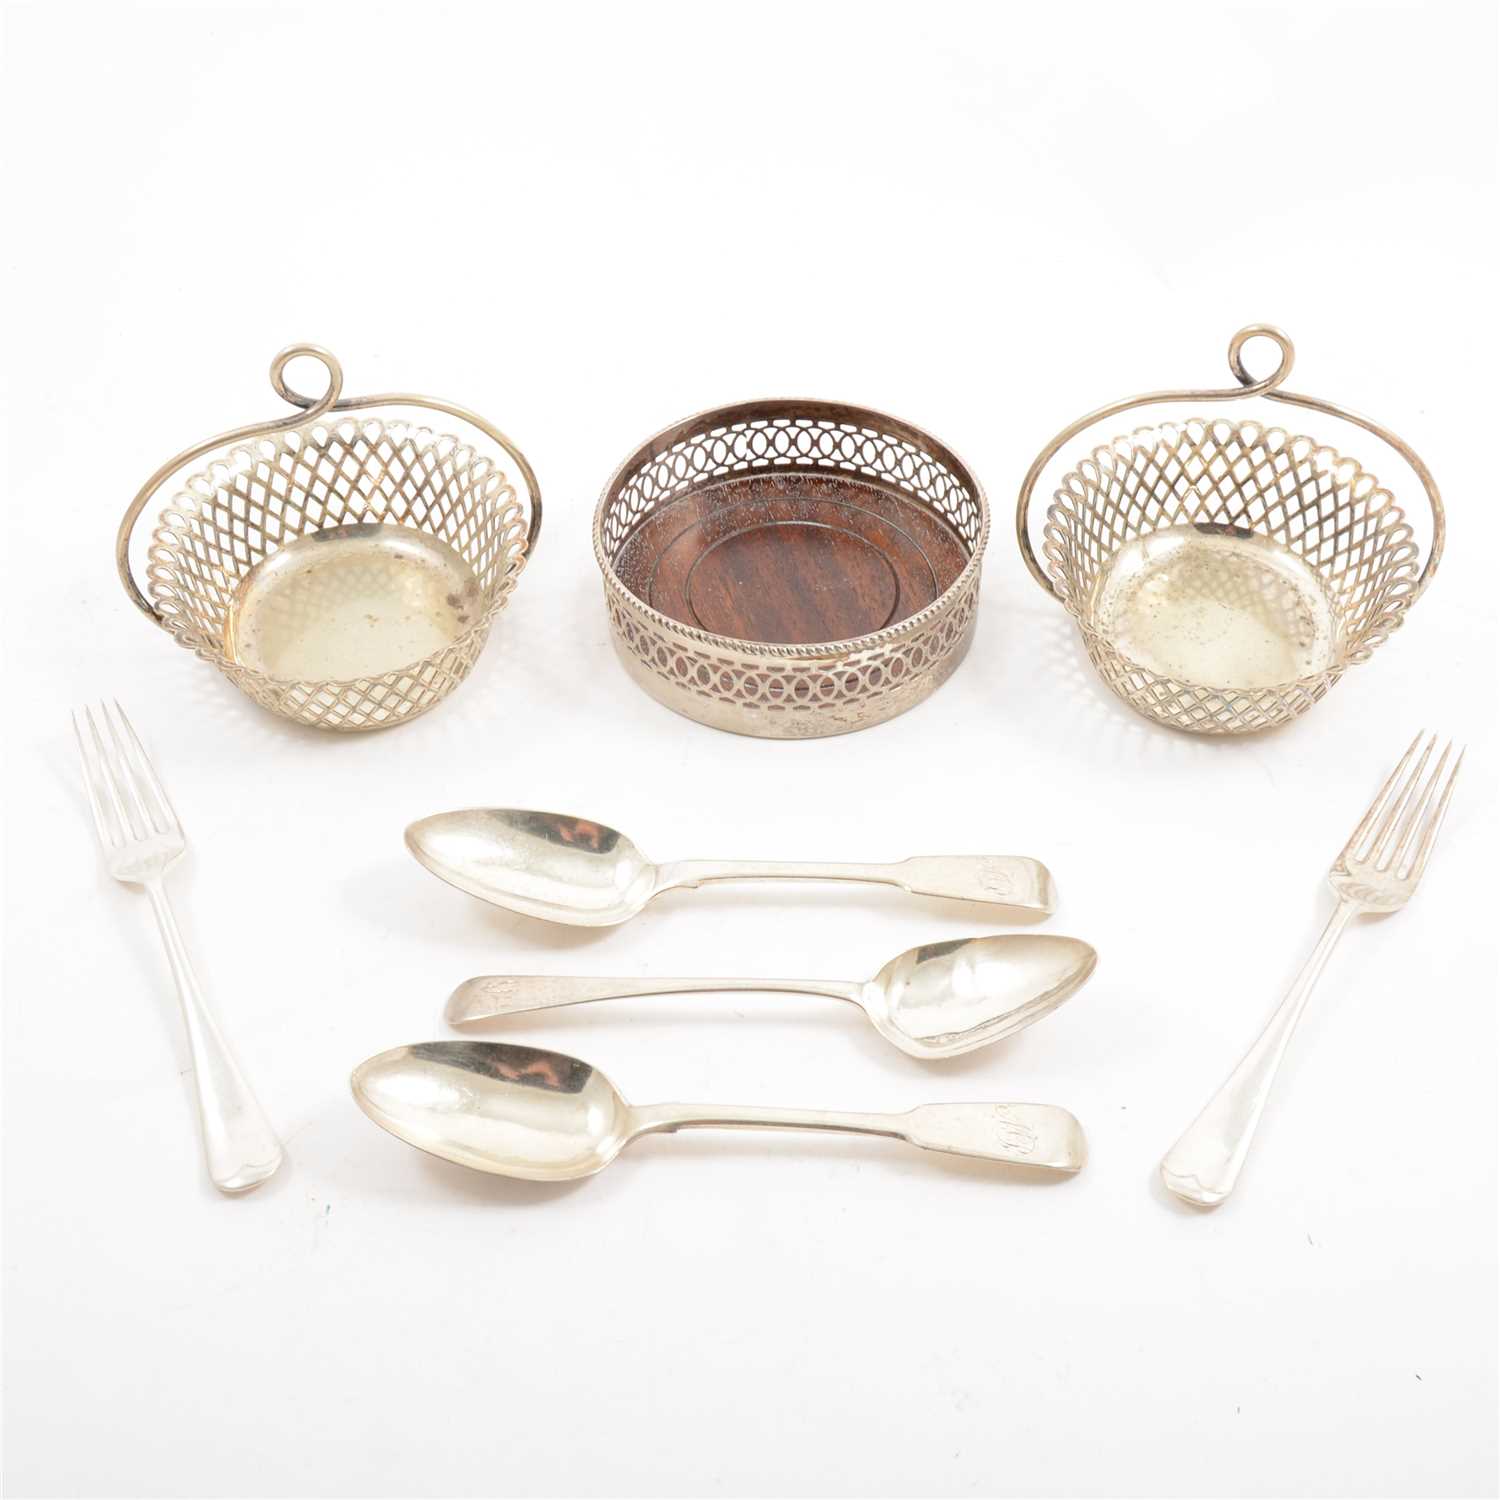 Lot 248 - A quantity of silver flatware plus some plated items, to include six forks by Z Barraclough & Sons (James Henry & Herbert Barraclough), London 1940, five small forks by Atkin Brothers, Sheffield 1942